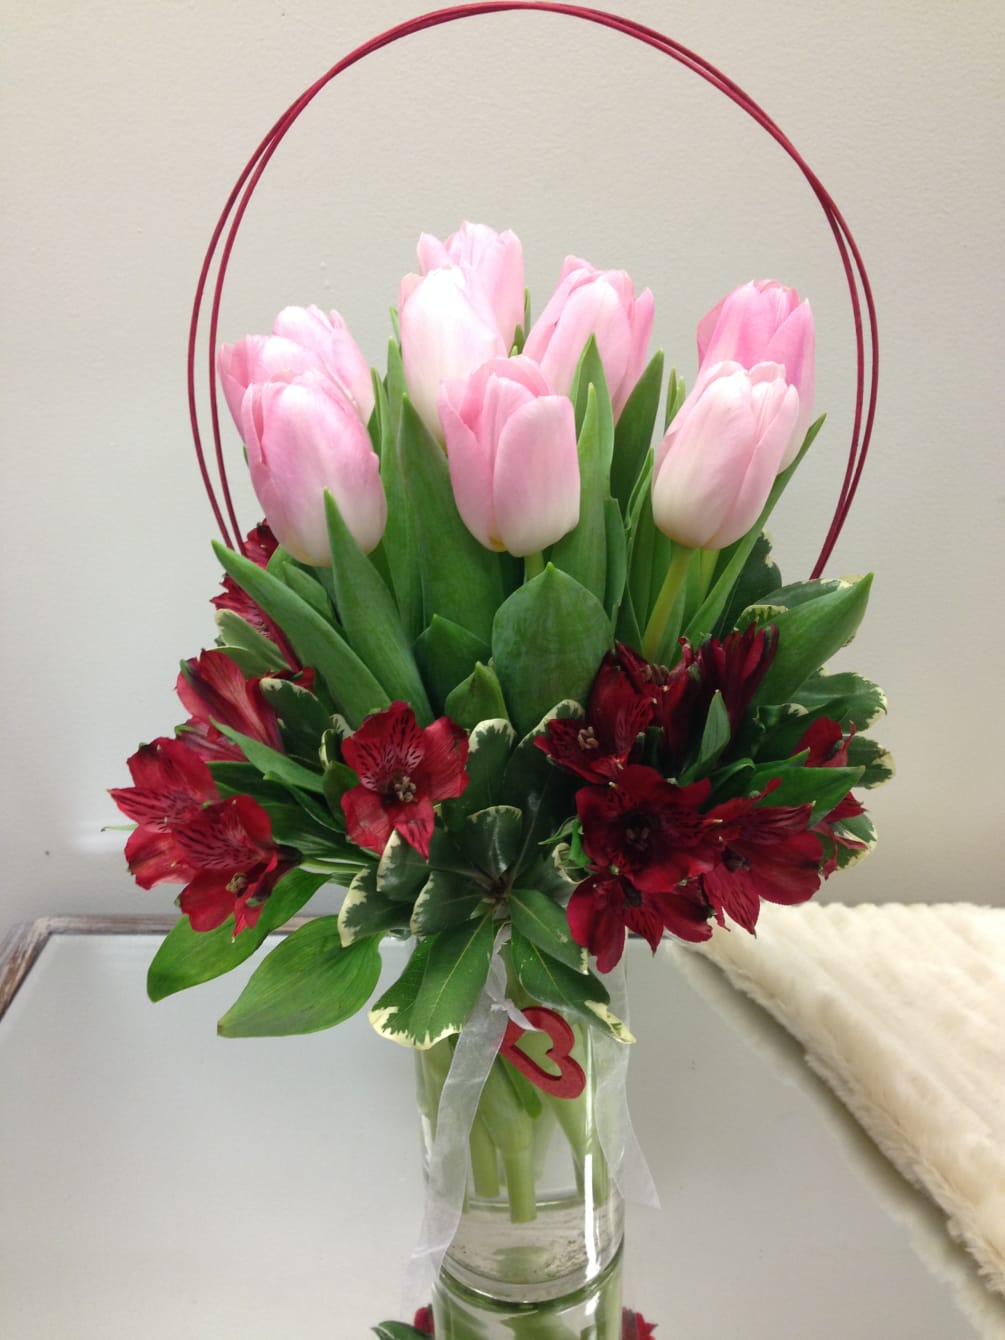 Tulips arranged in a vase accent with alstromeria lily. 
Tell them how